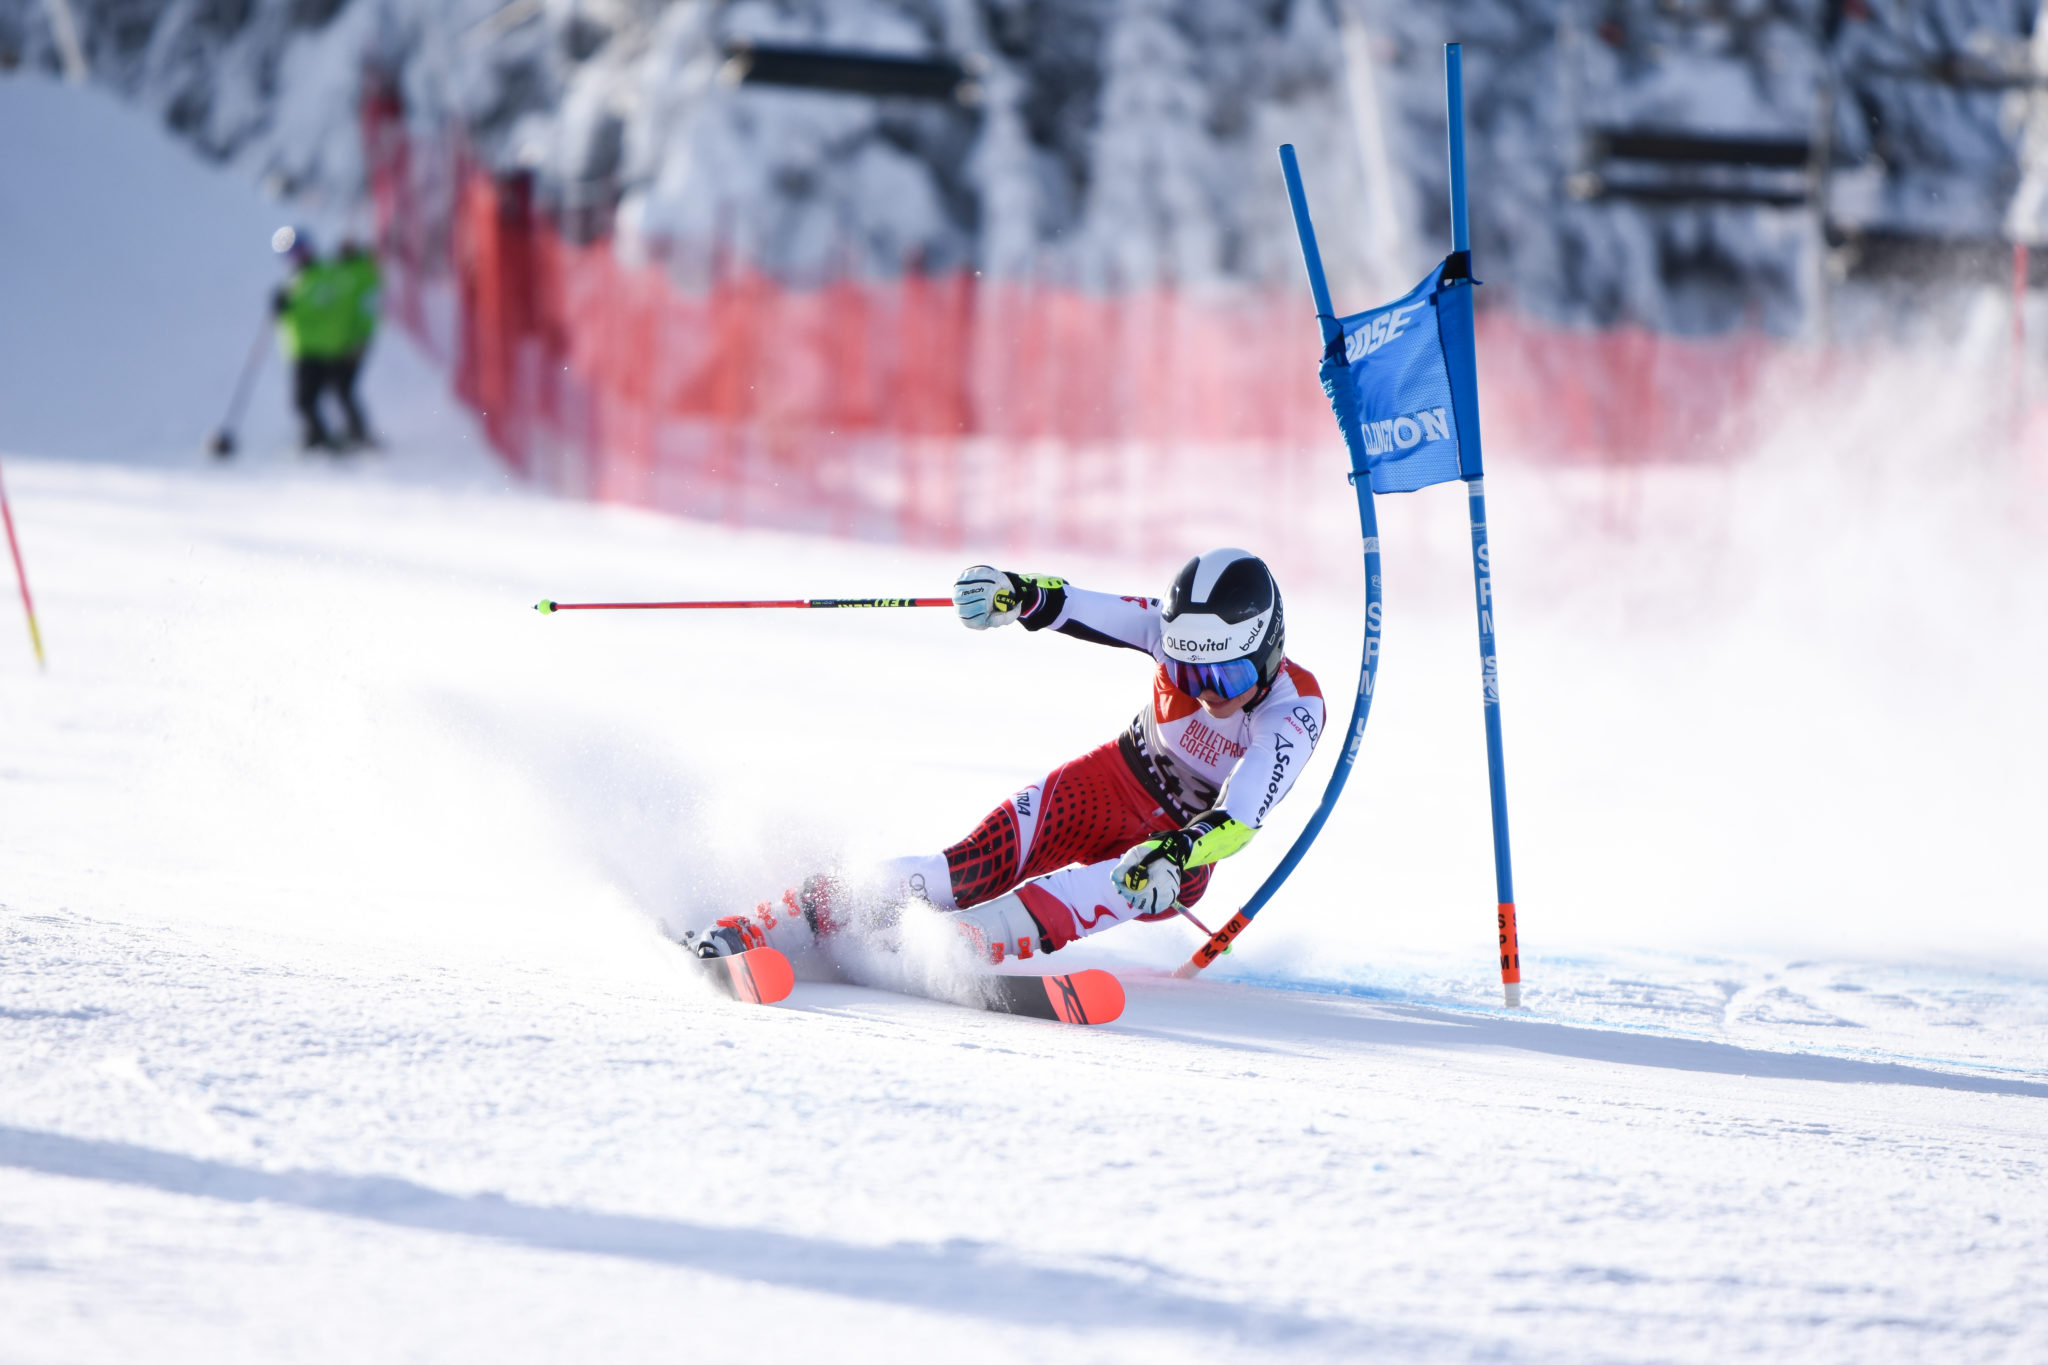 Killington World Cup Schedule and Ticket Sales Go Live